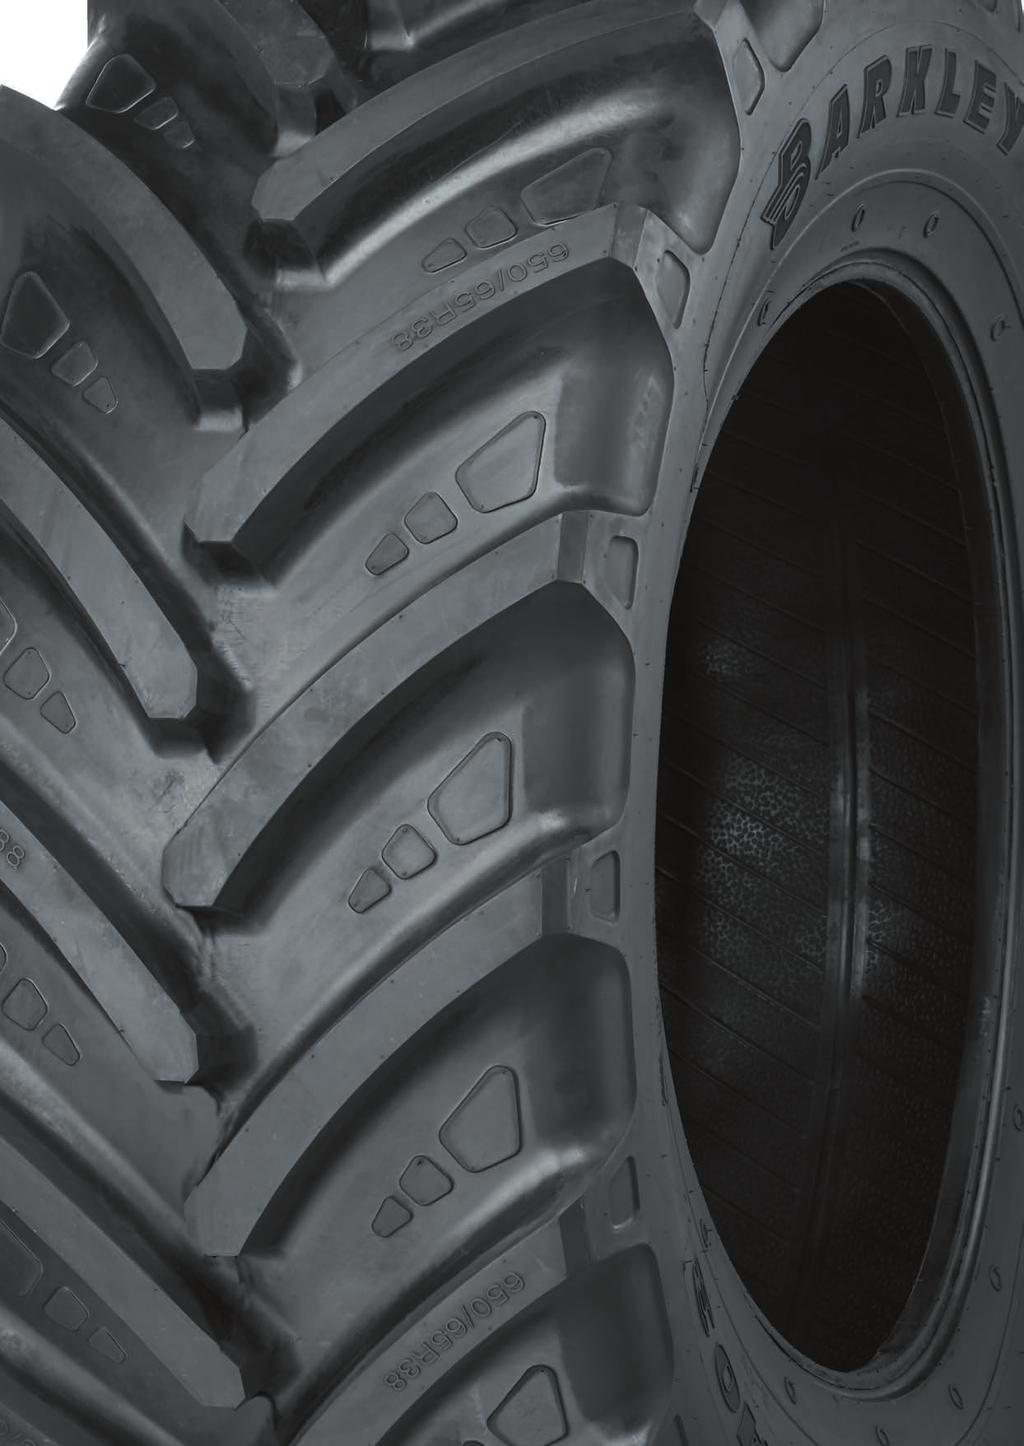 LIKE TO KNOW MORE? CHECK OUT OUR WEBSITE! barkleytyres.